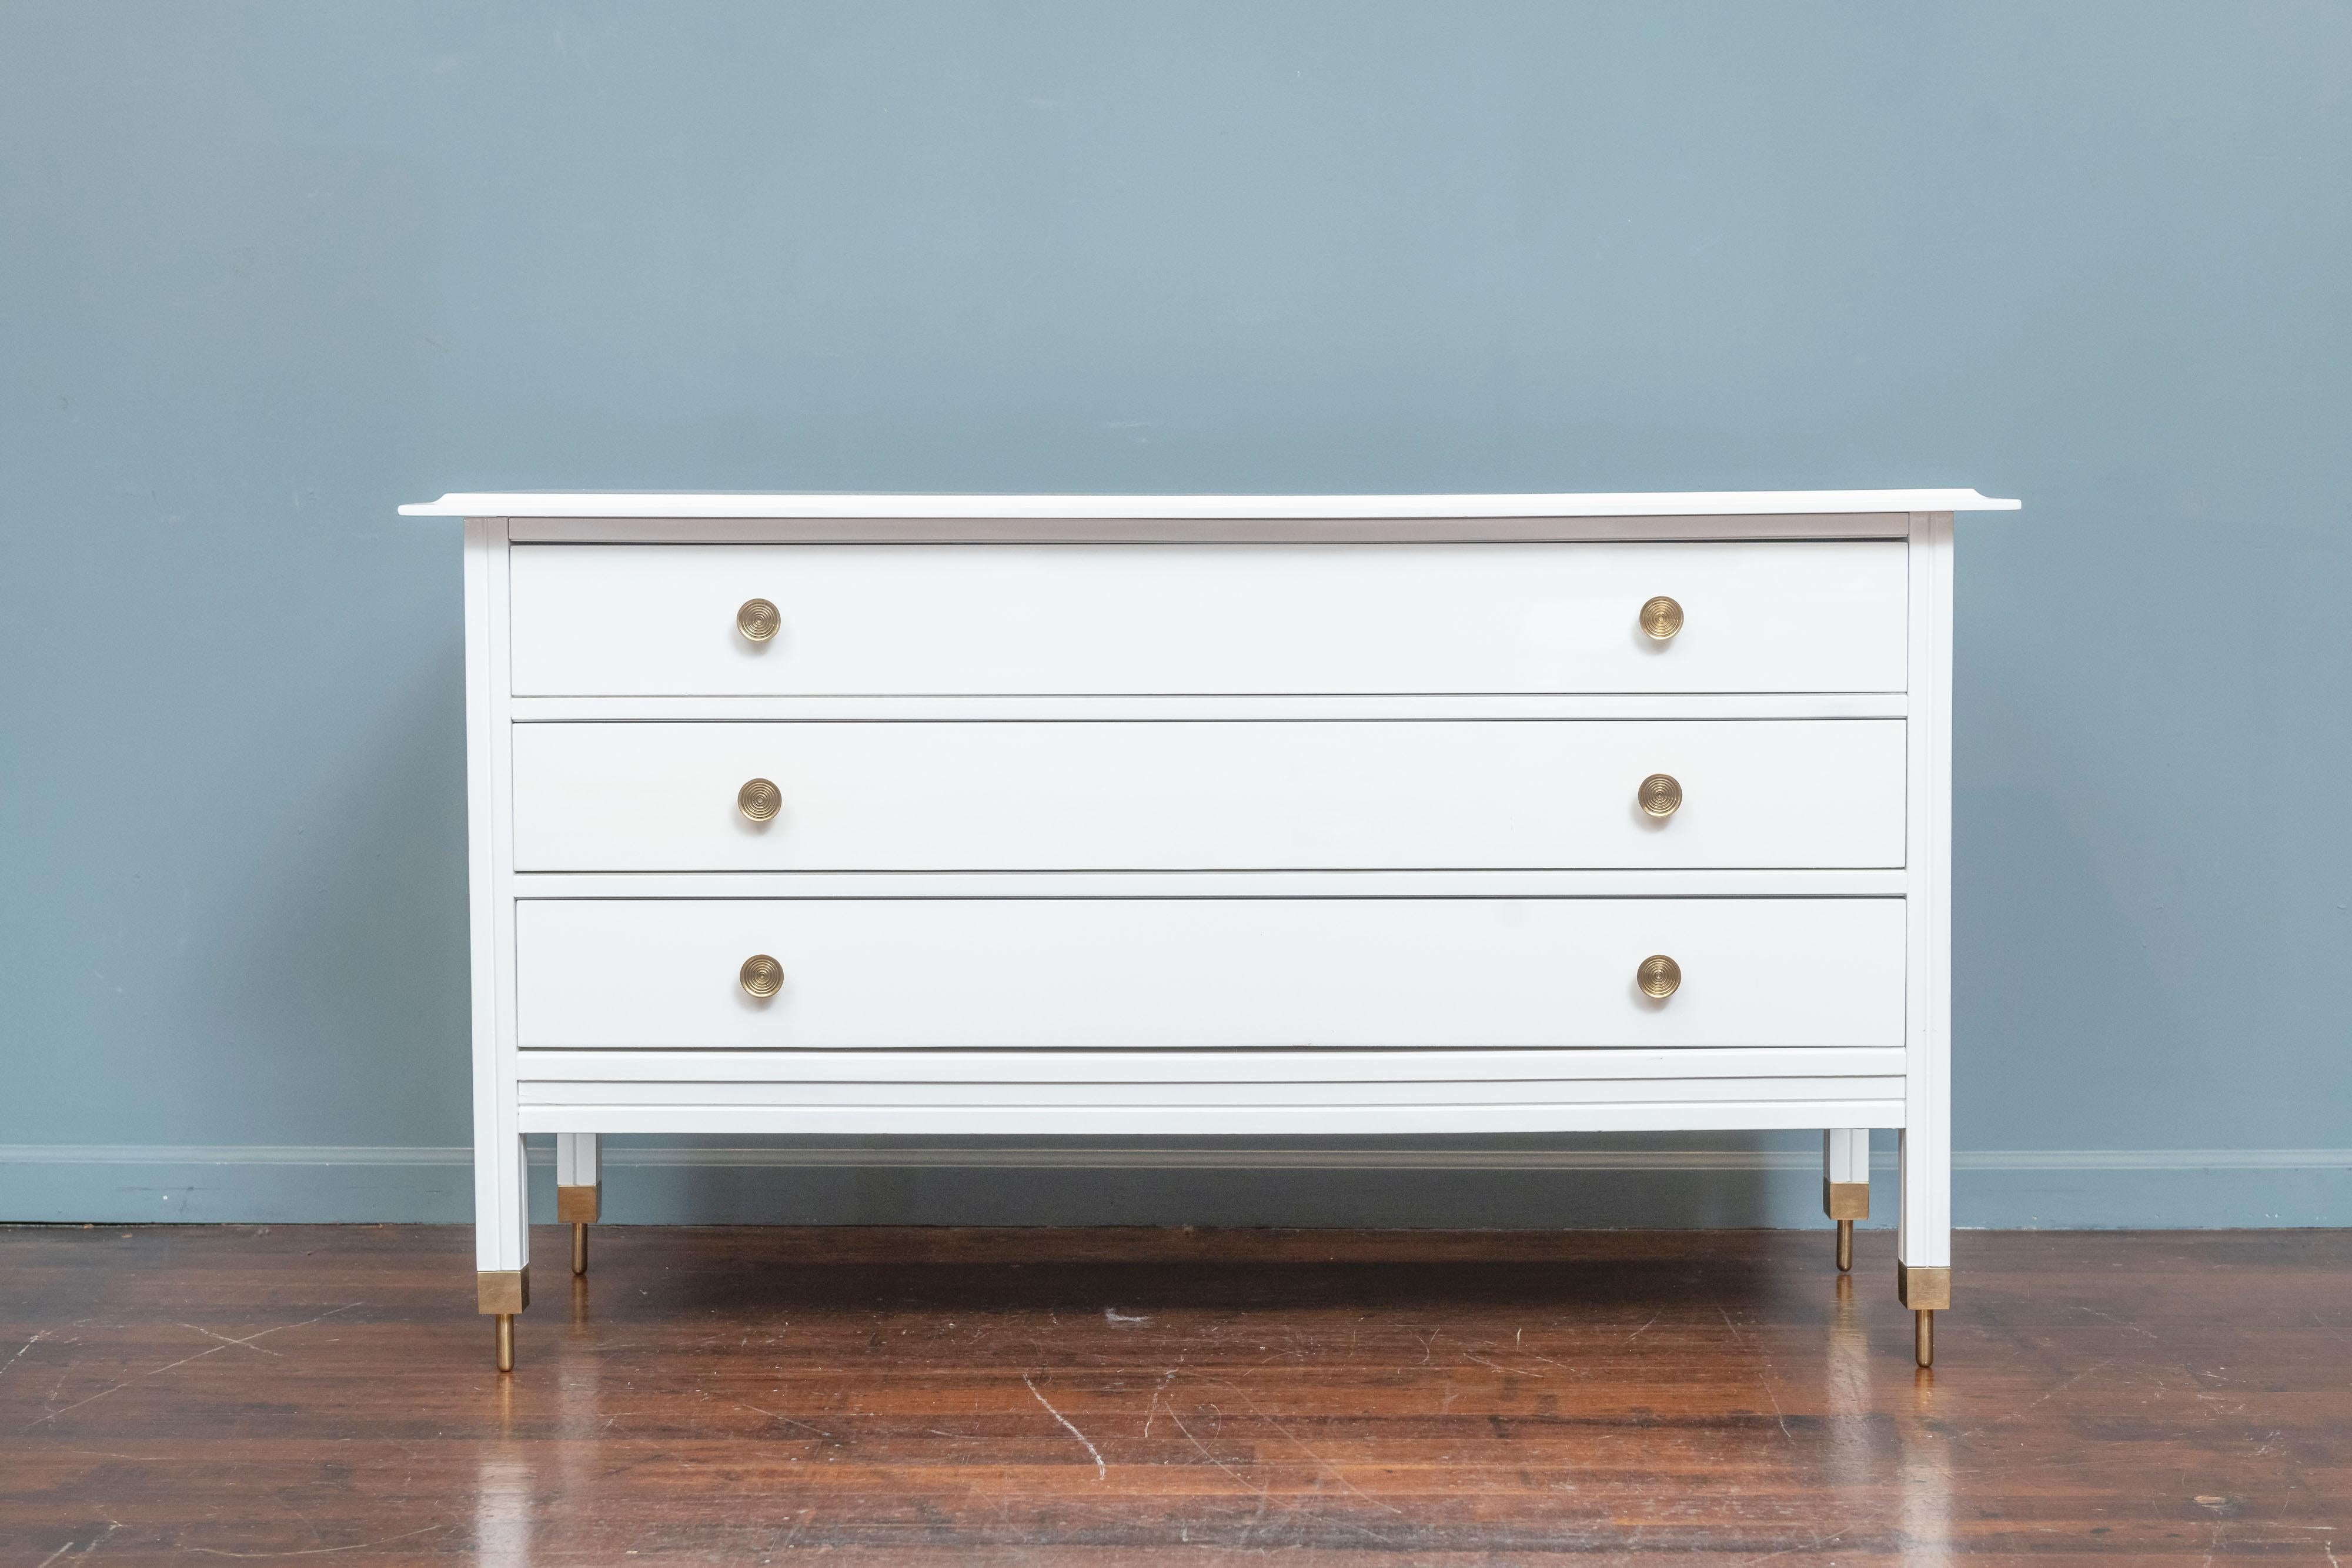 Carlo de Carli chest of drawers or commode for Sormani Model D154. High gloss white lacquer finish with polished brass hardware in a neoclassical taste but modern and refreshing. Ready to install and enjoy.